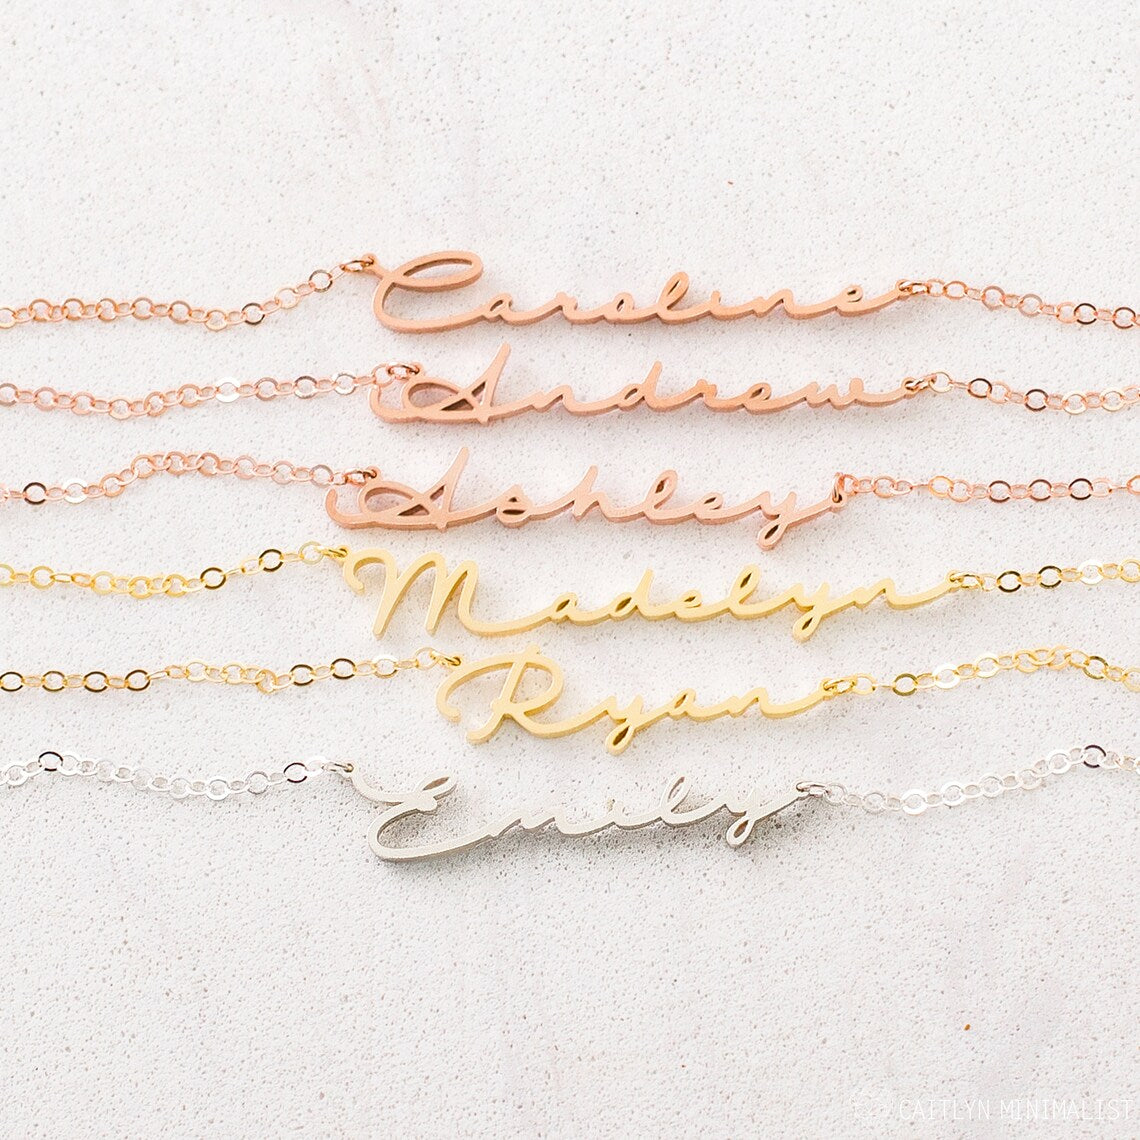 Dainty Name Necklace • Personalized Name Jewelry • Tiny Name Necklace • Baby Girl Name Necklace • Bridesmaids Gift • Baby Shower Gift • Gift for Her